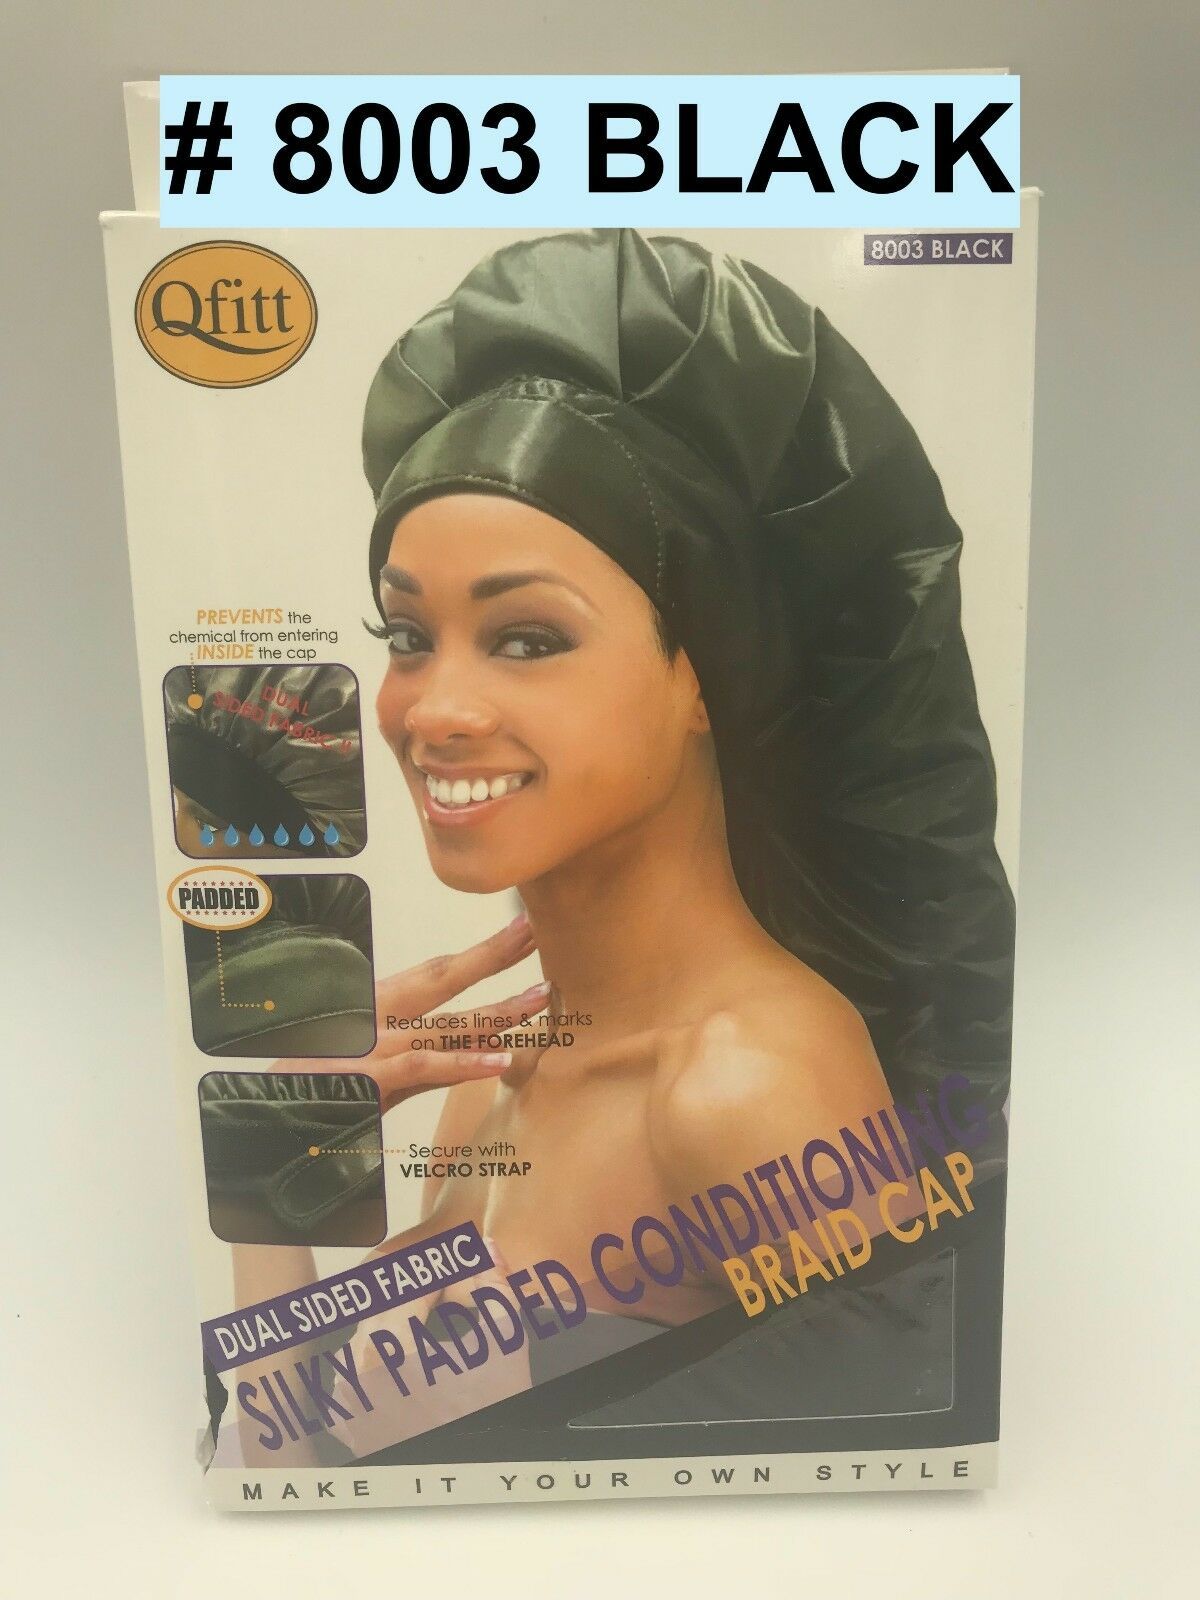 Primary image for QFITT DUAL SIDED FABRIC SILKY PADDED CONDITIONING BRAID CAP #8003 BLACK